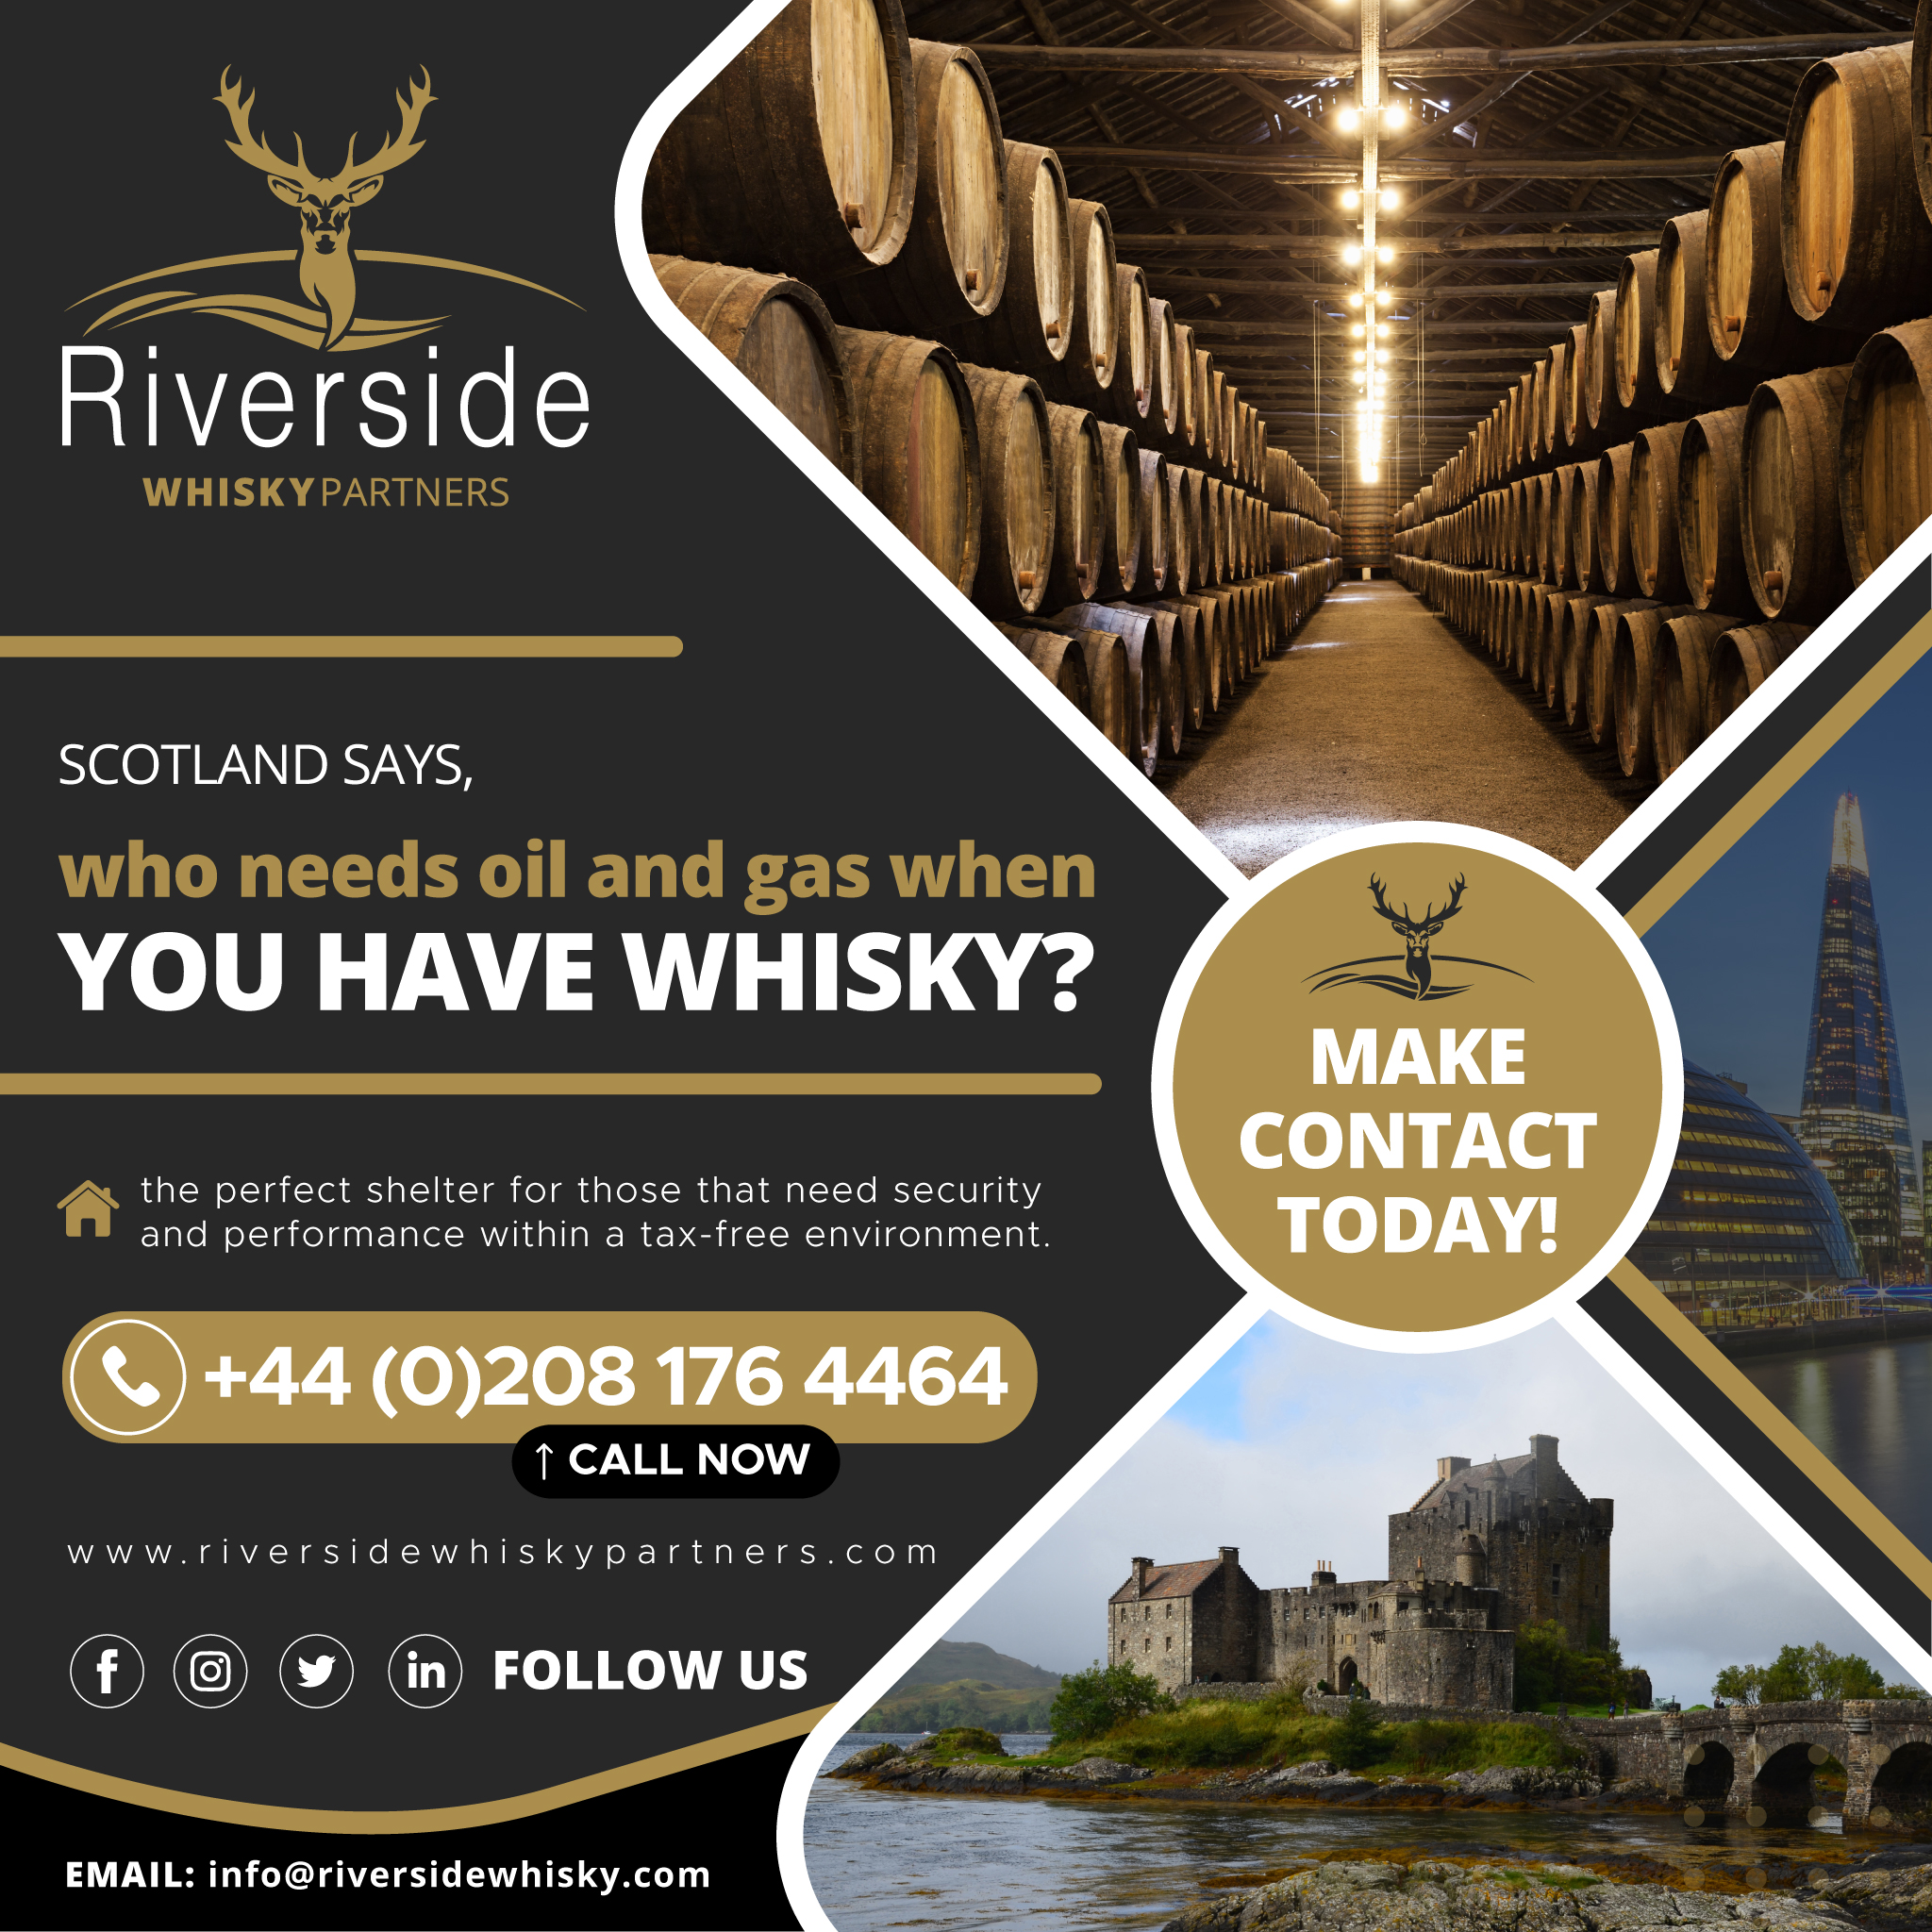 Scotland says, who needs oil and gas when you have whisky?